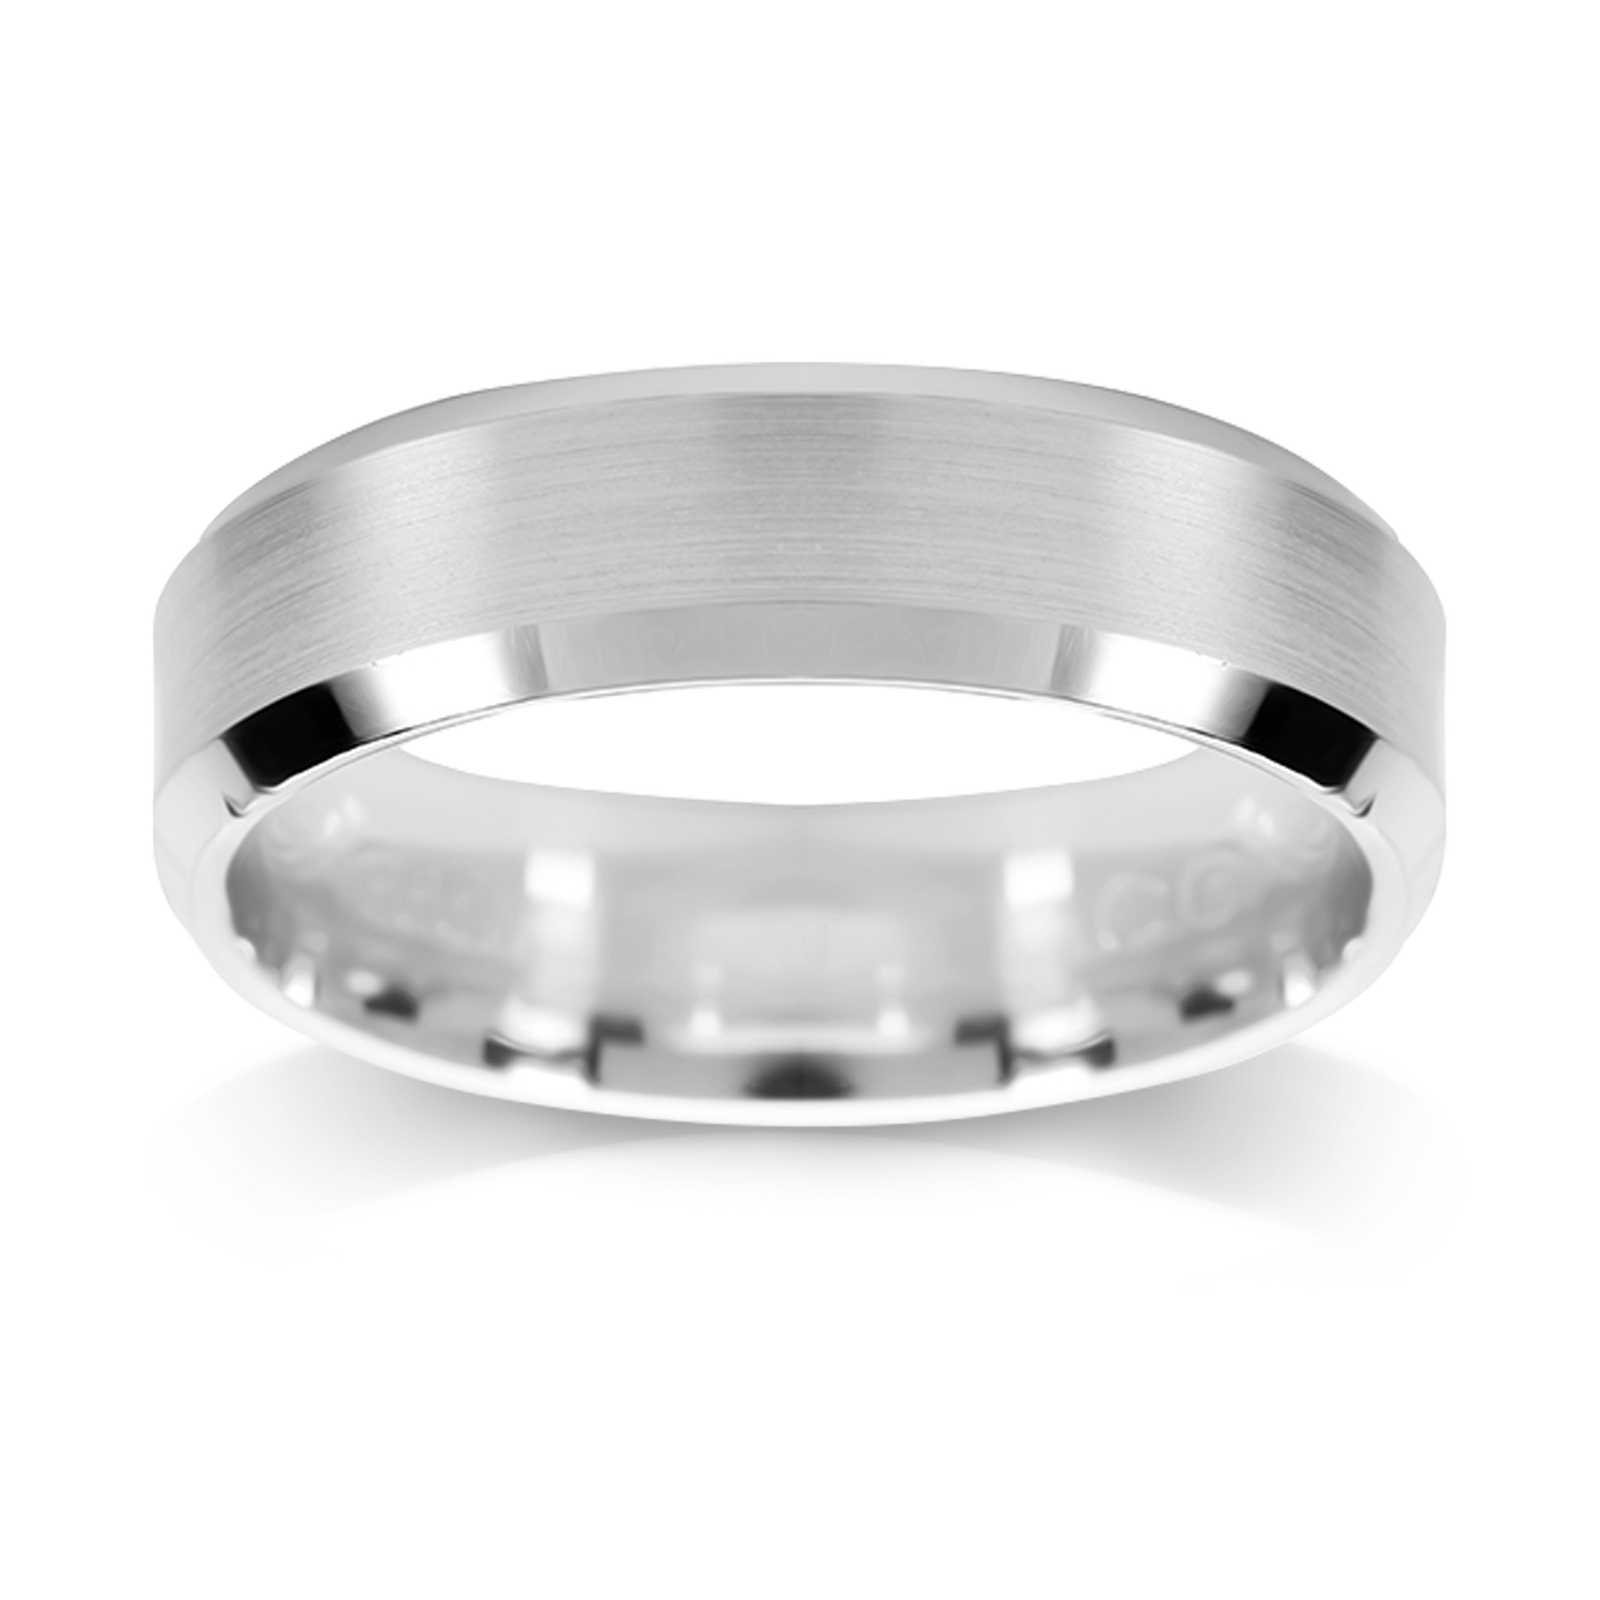 Platinum 6mm Concave & Polished Edge Wedding Ring | Rings | Jewellery ...